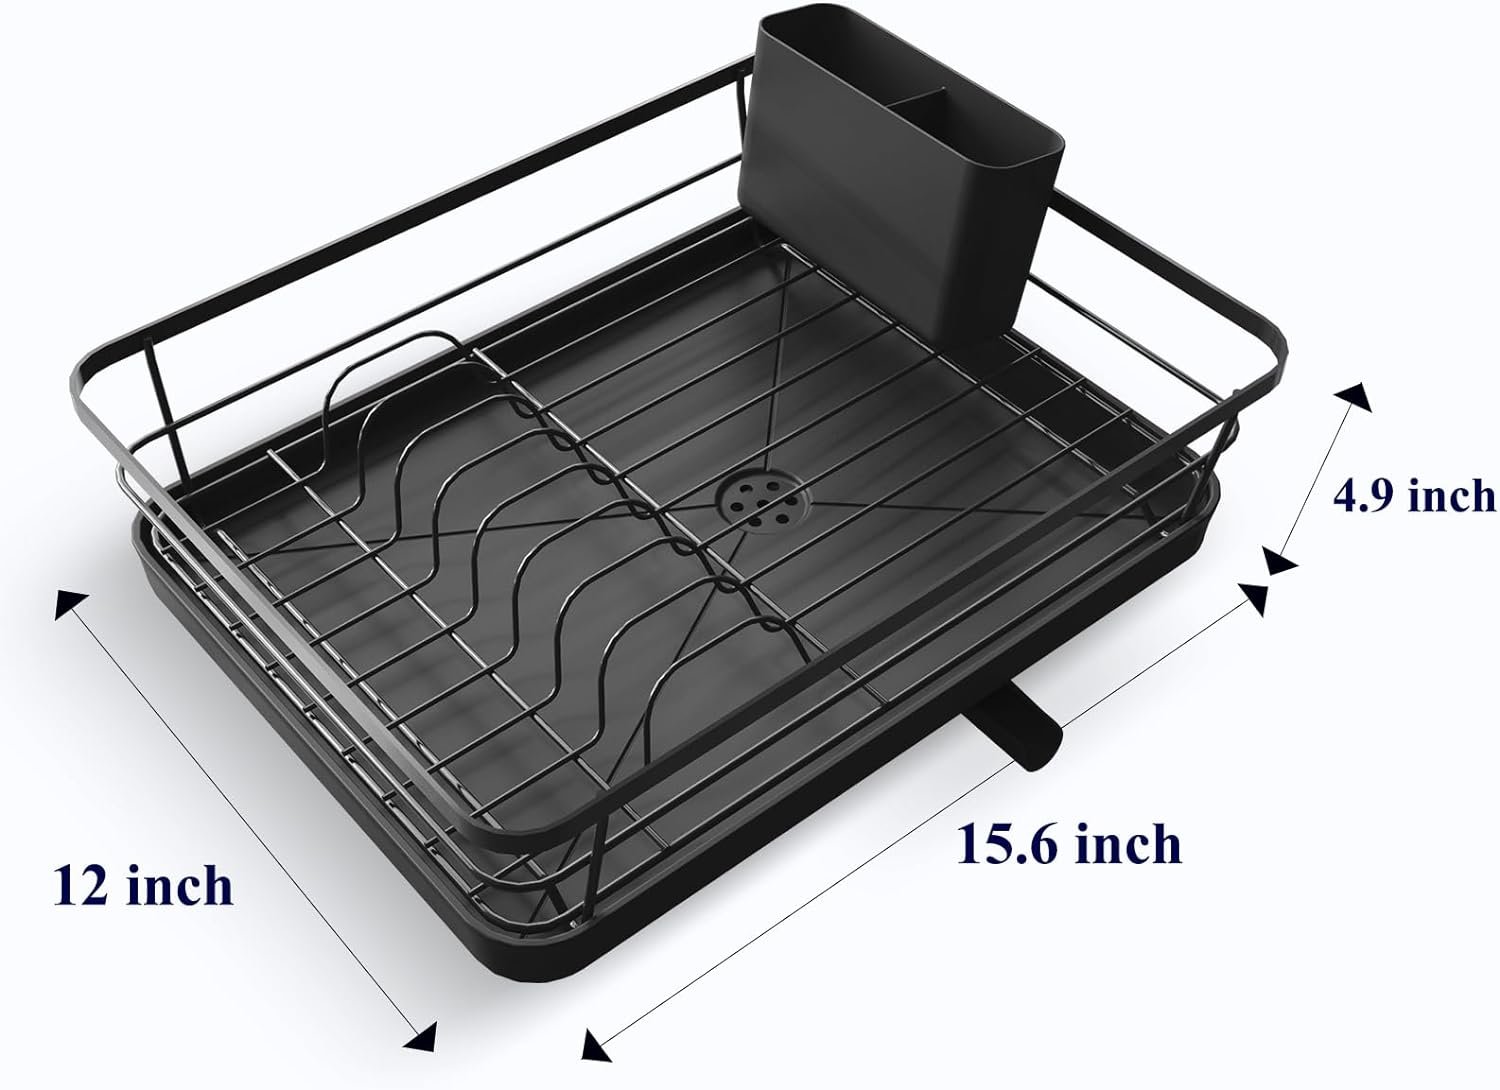 Kitsure Dish Drying Rack - Small Dish Racks for Kitchen Counter, Easy-to-Install Dish Rack with Adjustable Water Outlet, Stainless Steel Dish Drainers for Kitchen Counter, Black